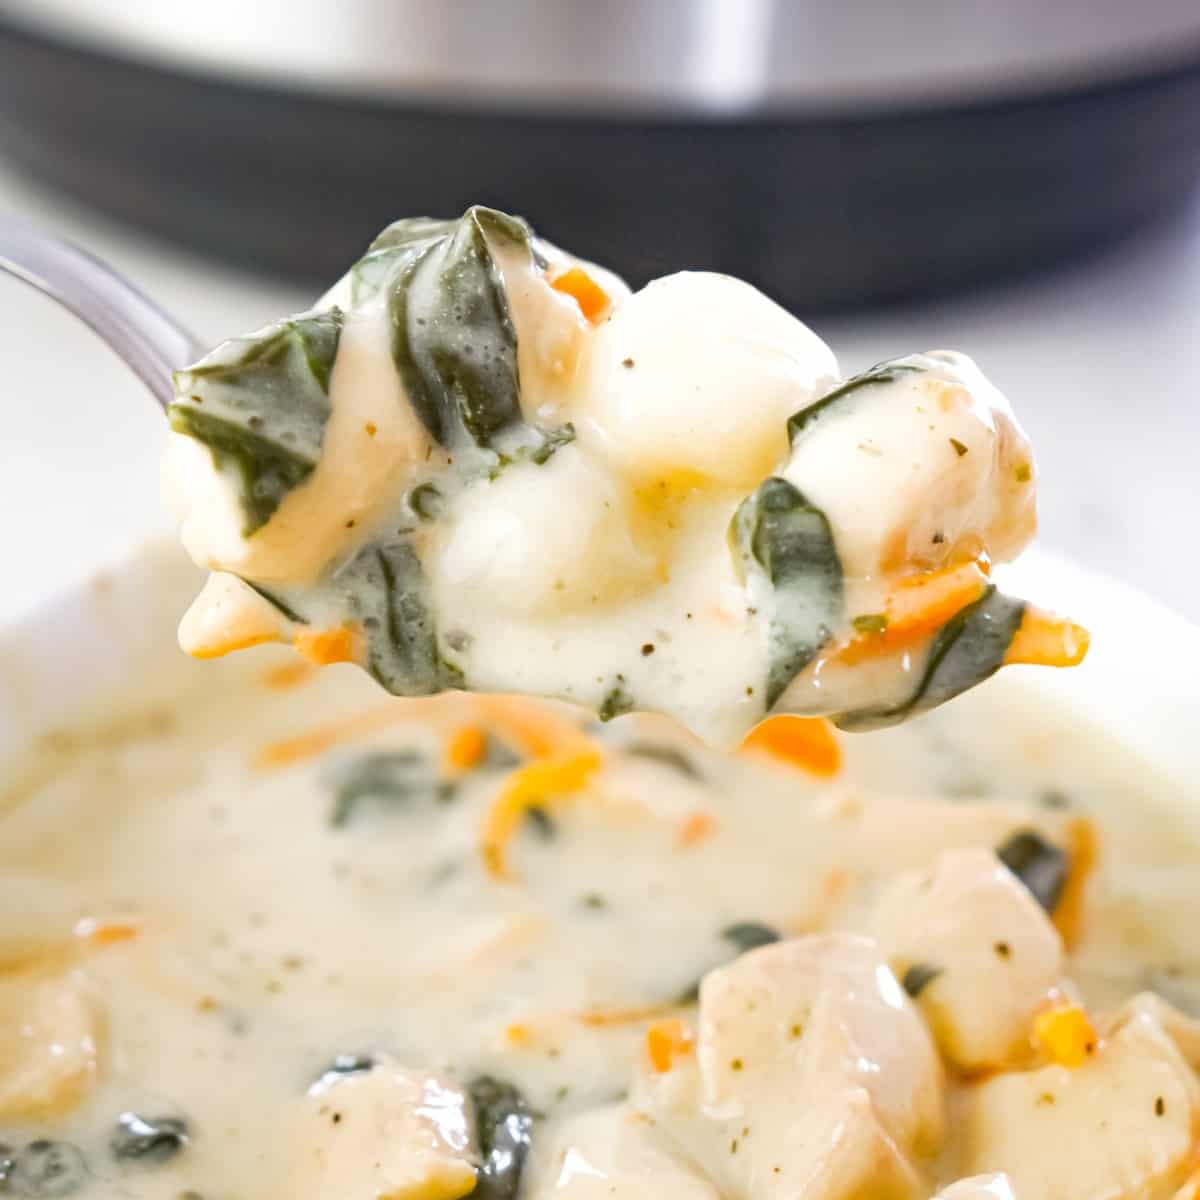 Instant Pot Chicken Gnocchi Soup is a hearty soup recipe loaded with chunks of chicken breast, potato gnocchi, carrots and shredded spinach.